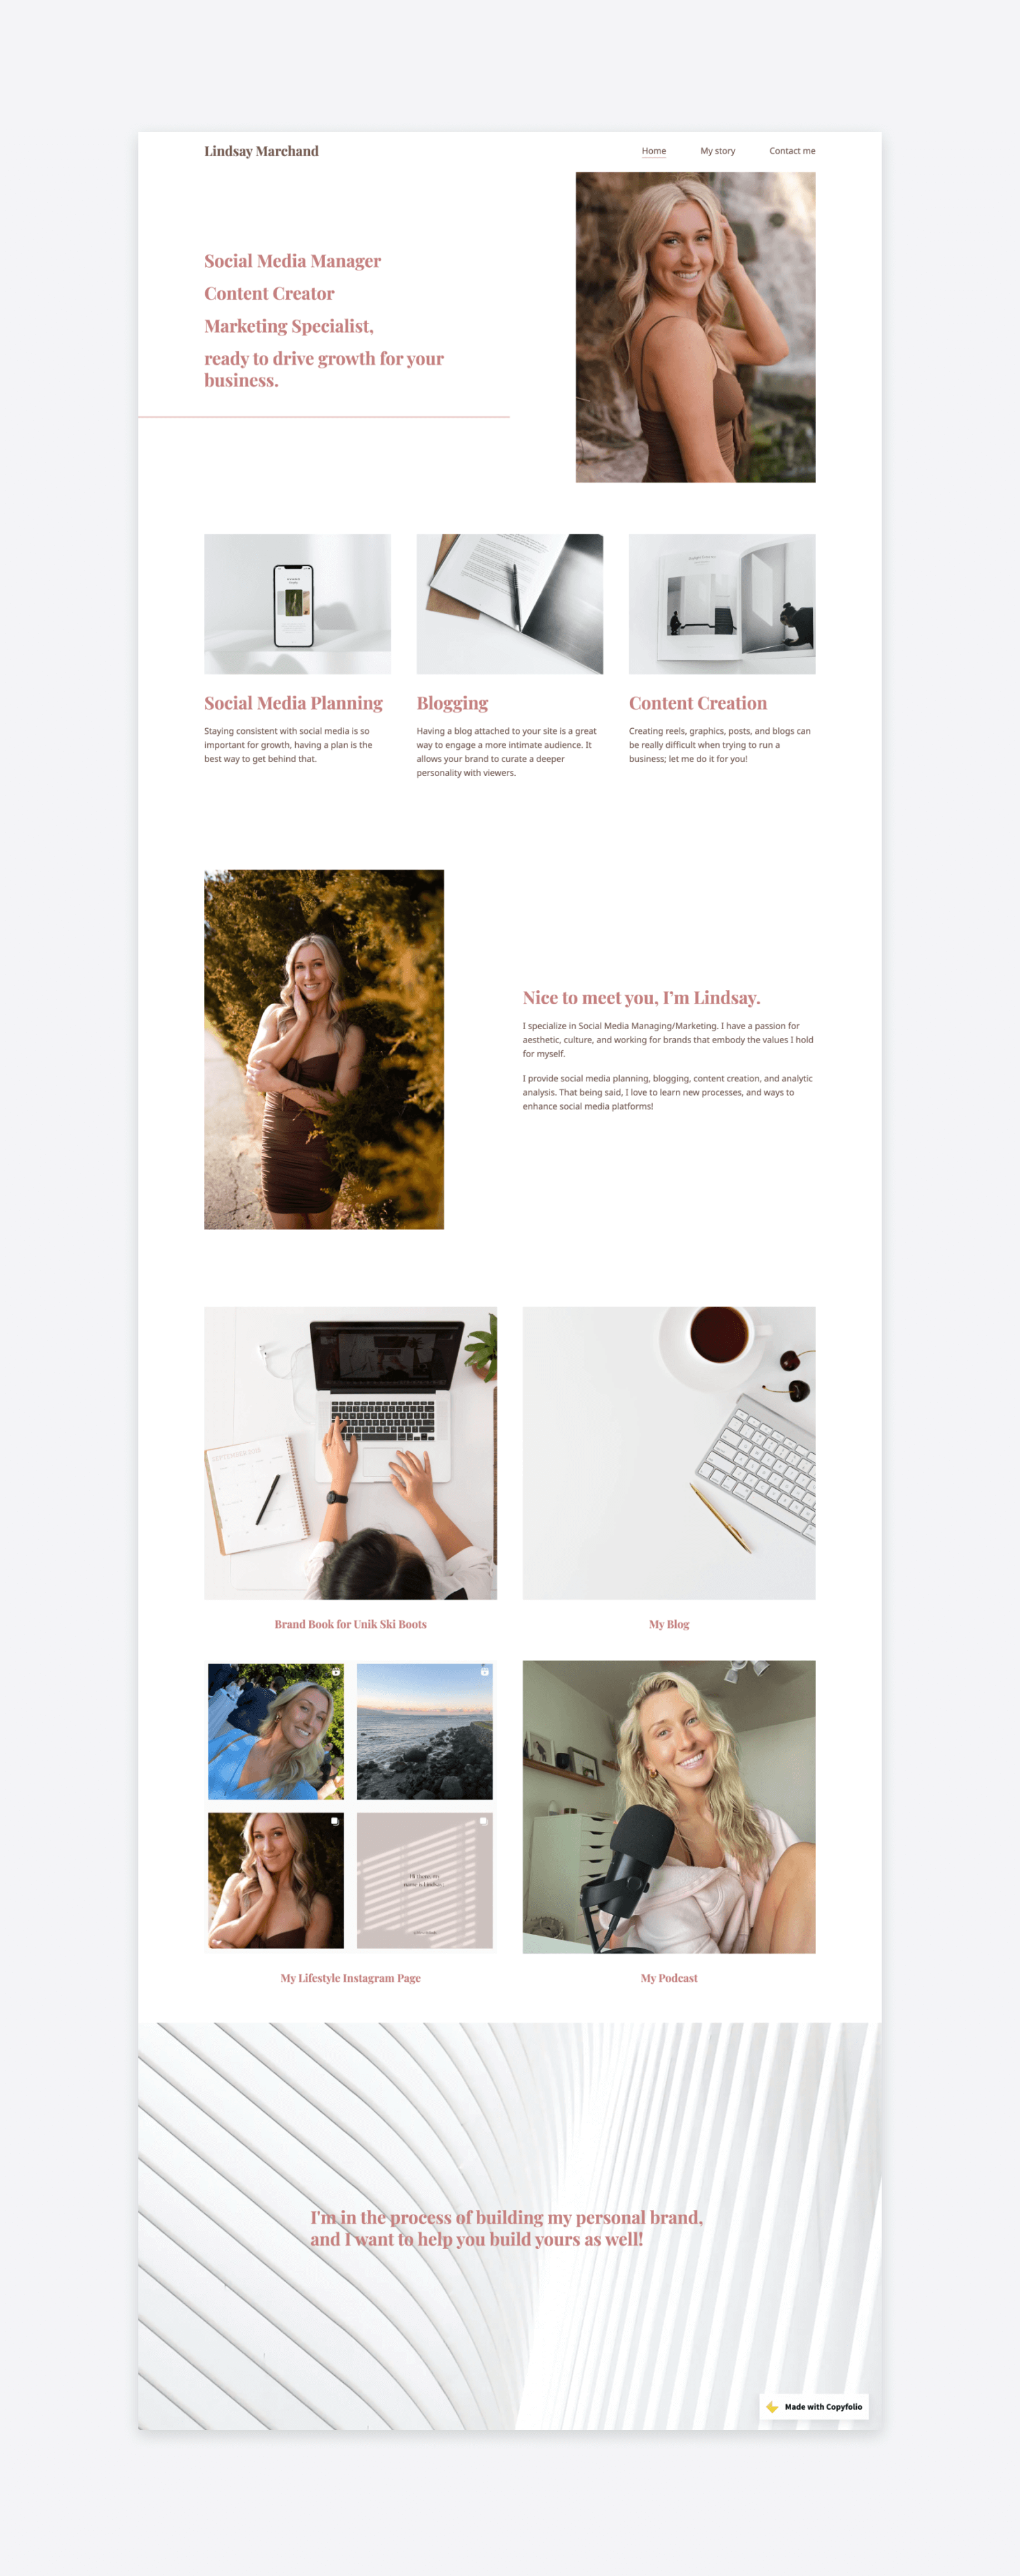 Lindsay's marketing portfolio, showcasing her top services, a short intro section about her, and her favorite projects